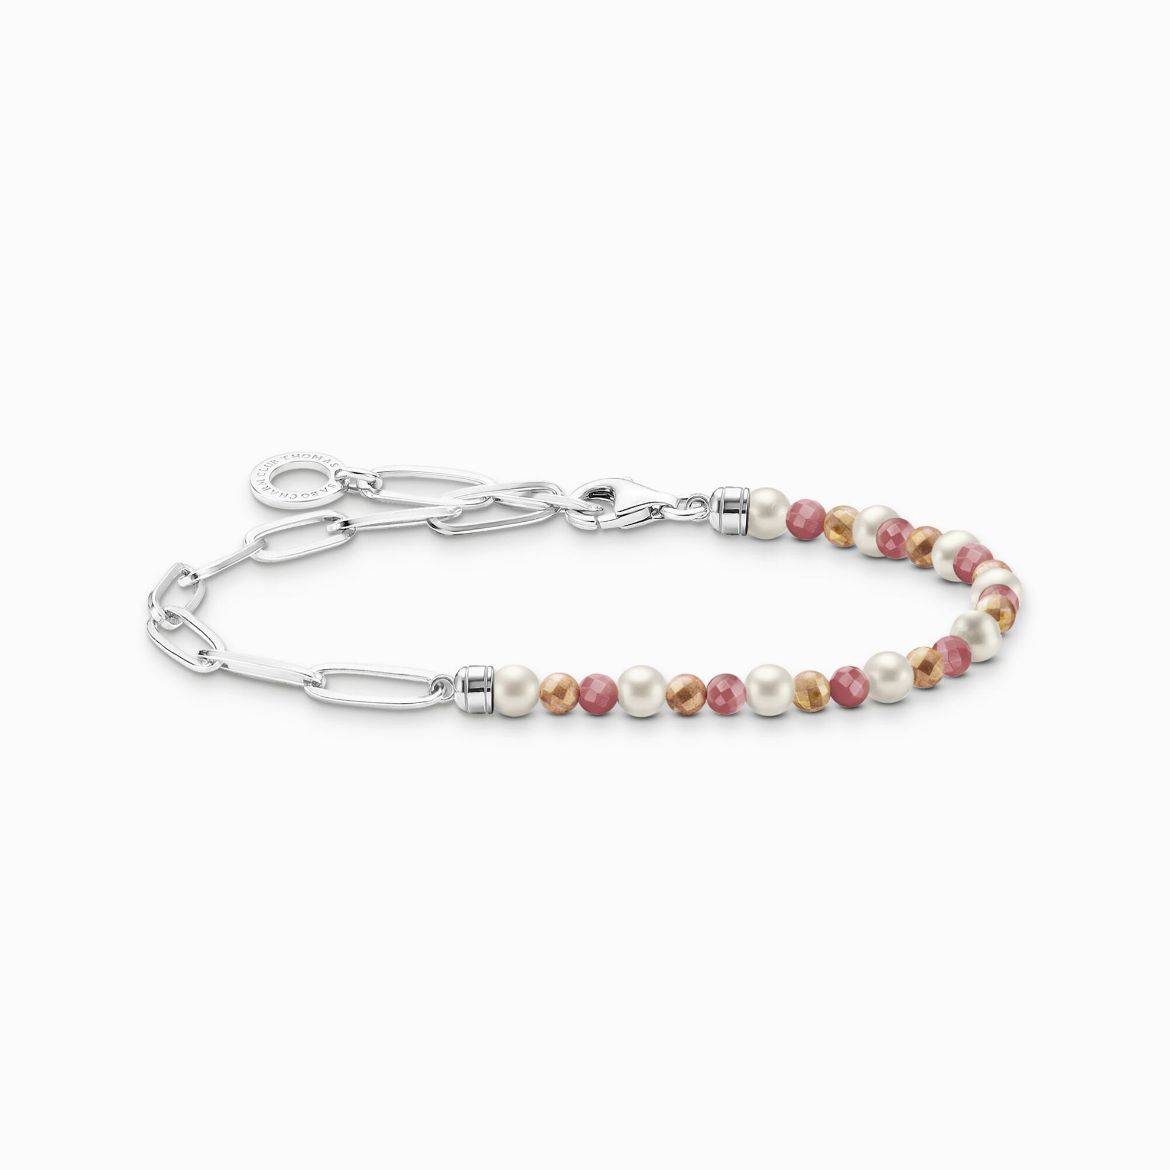 Picture of Charm Bracelet with Colourful Beads, White Pearls and Chain Links in Silver